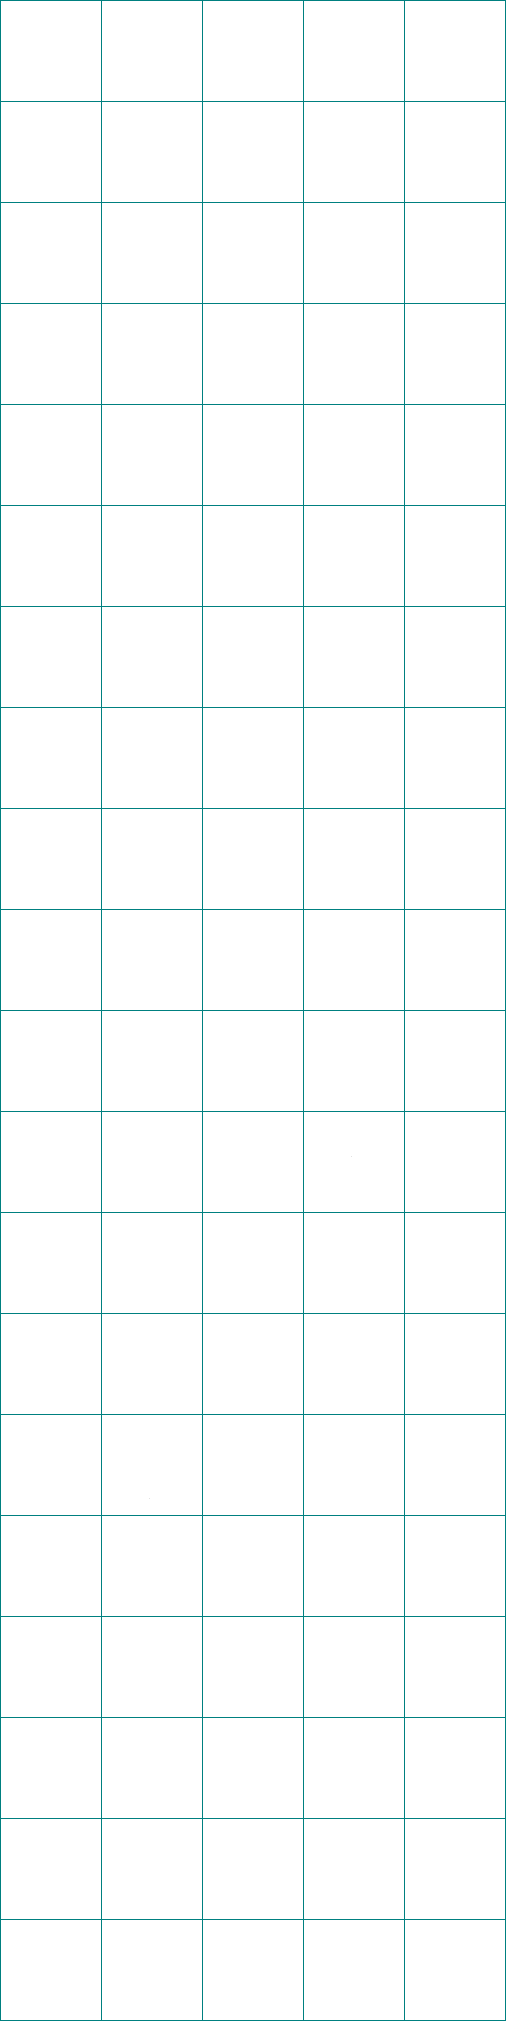 Sound Effect Icons